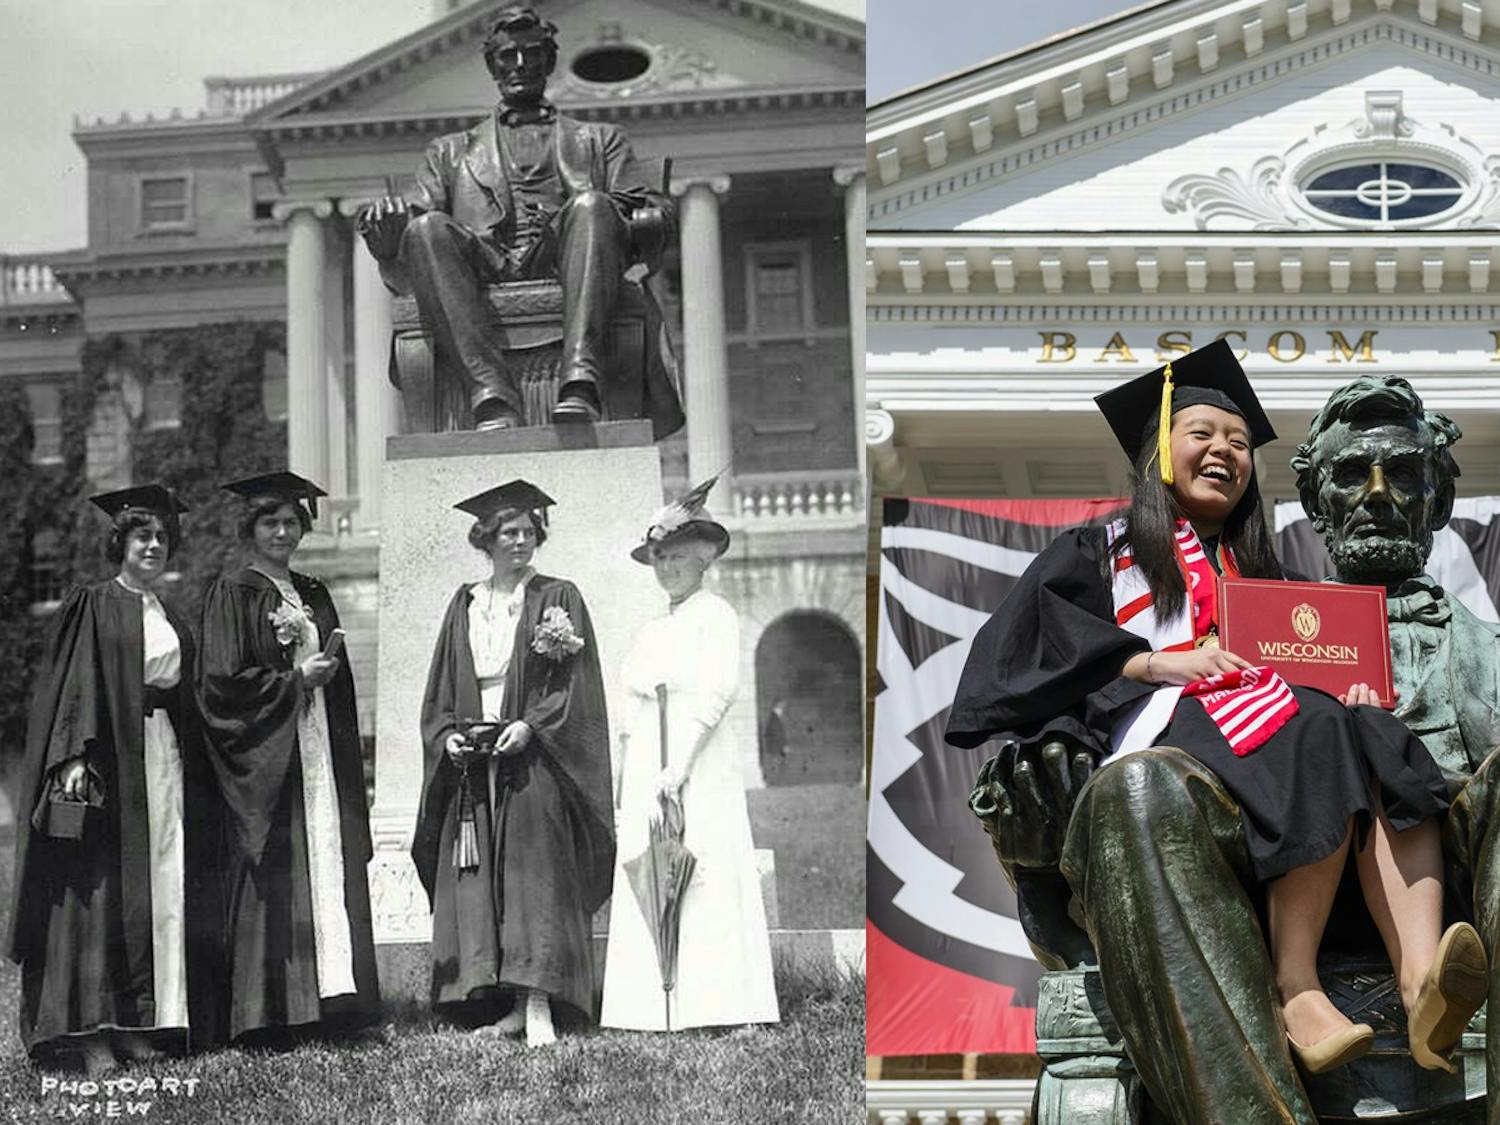 A side by side comparison of women graduates historically and in front of Bascom.